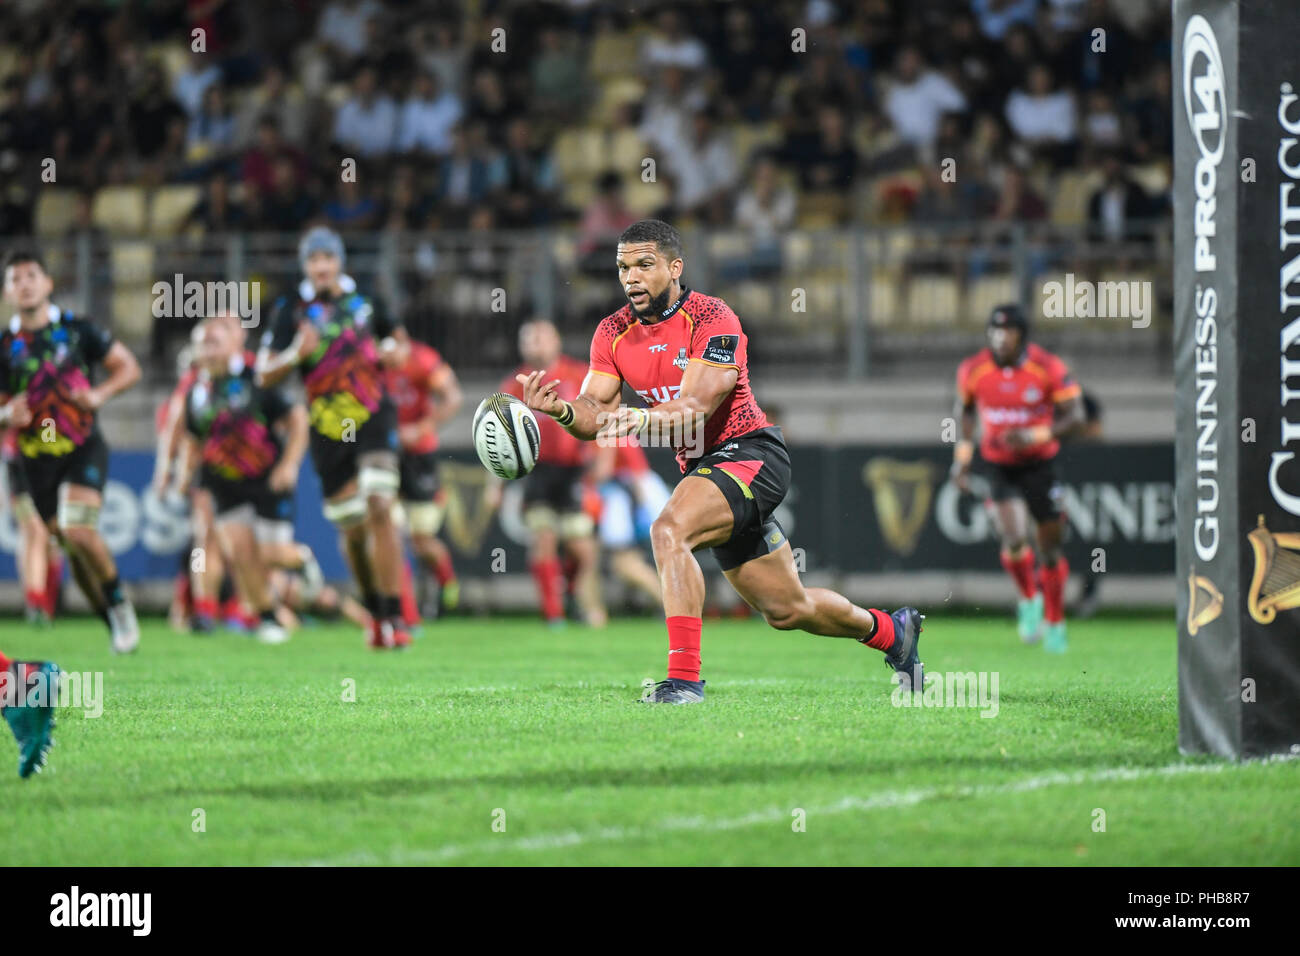 Parma, Italy. 31th August, 2018. Kings' centre Berton Klassen passes the ball in the match against Zebre in GuinnessPro14. Credit: Massimiliano Carnabuci/Alamy Live News Stock Photo